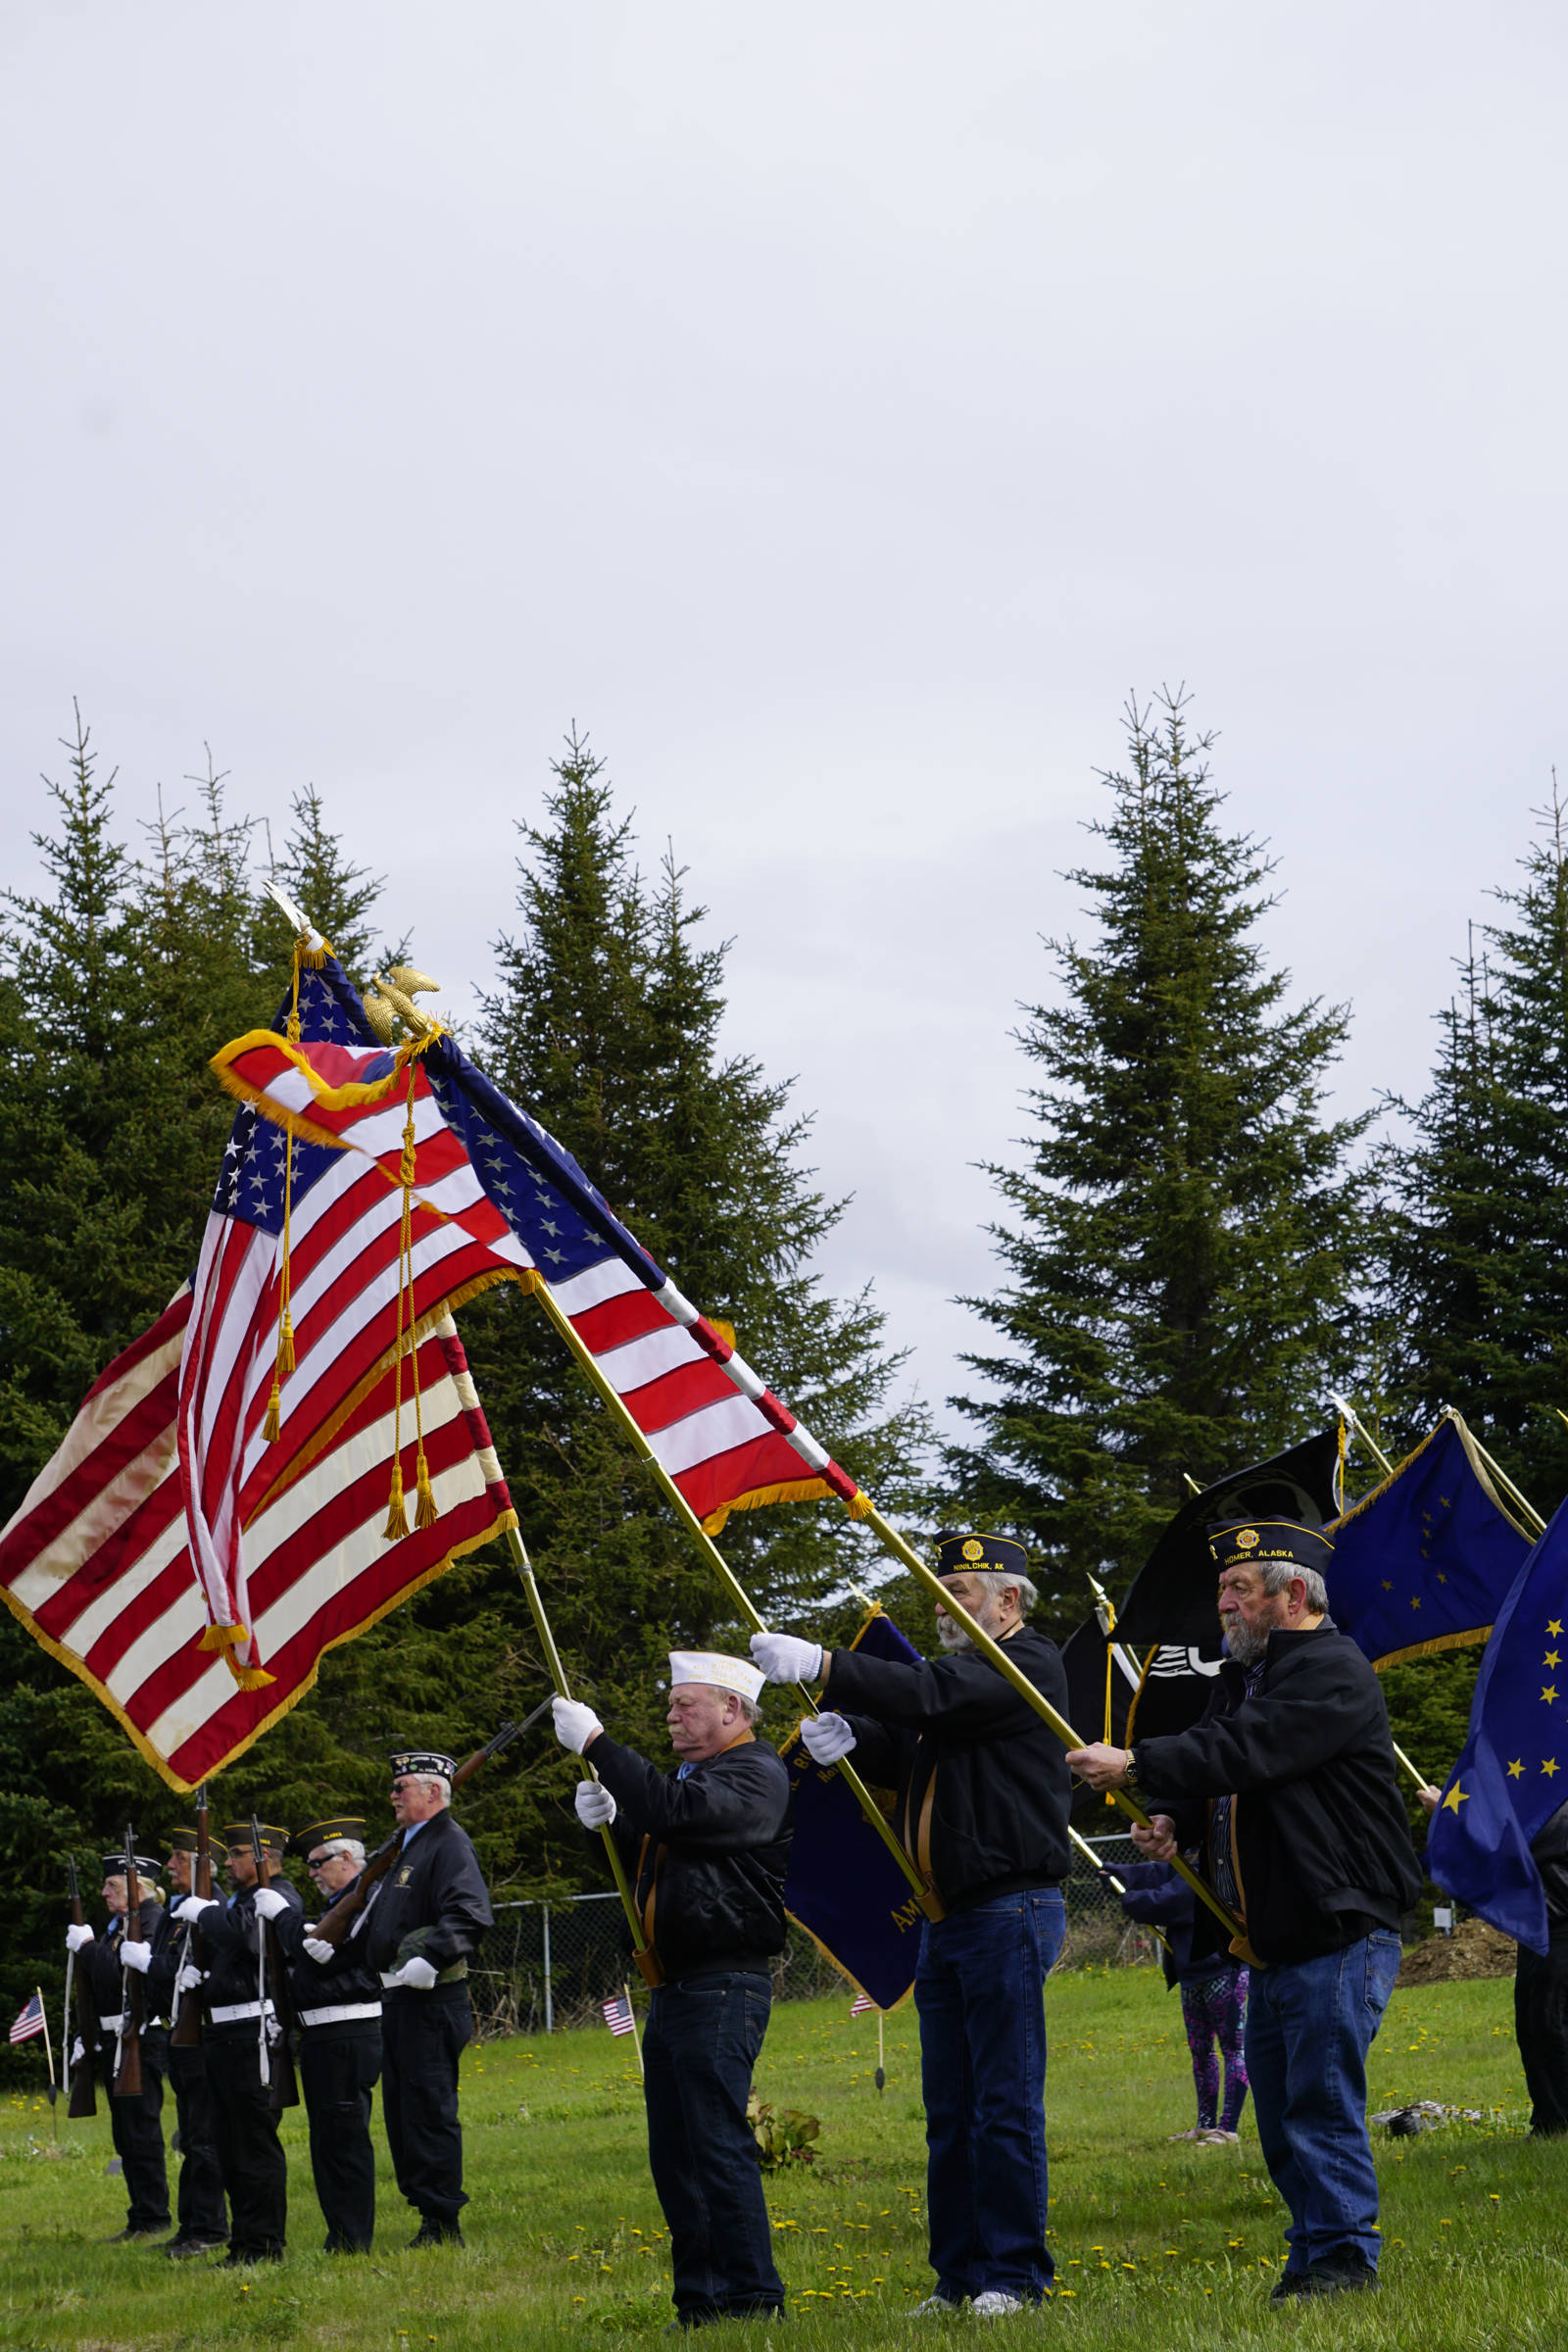 Members of the Veterans of Foreign Wars, the American Legion, Homer and Ninilchik posts, the American Legion Auxiliary and the Sons of the American Legion hold an honor guard at Memorial Day ceremonies on Monday, May 27, 2019, at Hickerson Memorial Cemetery in Homer, Alaska. About 75 people braved a blustery wind to attend the ceremonies. (Photo by Michael Armstrong/Homer News)